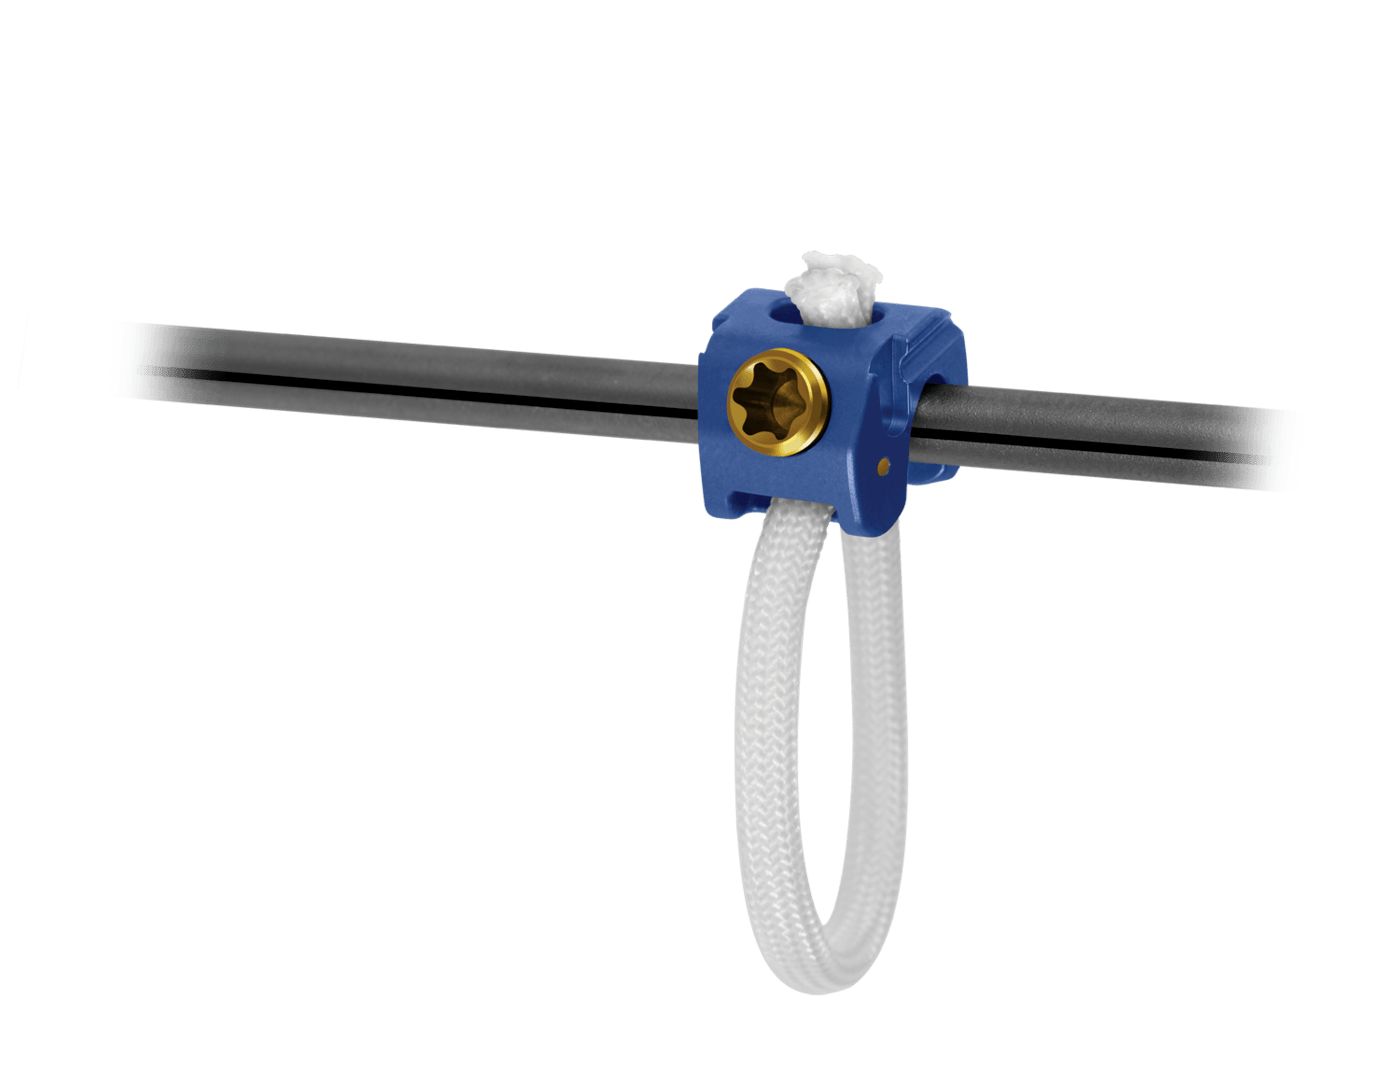 SILC® Low-Profile Fixation System Clamp on Rod